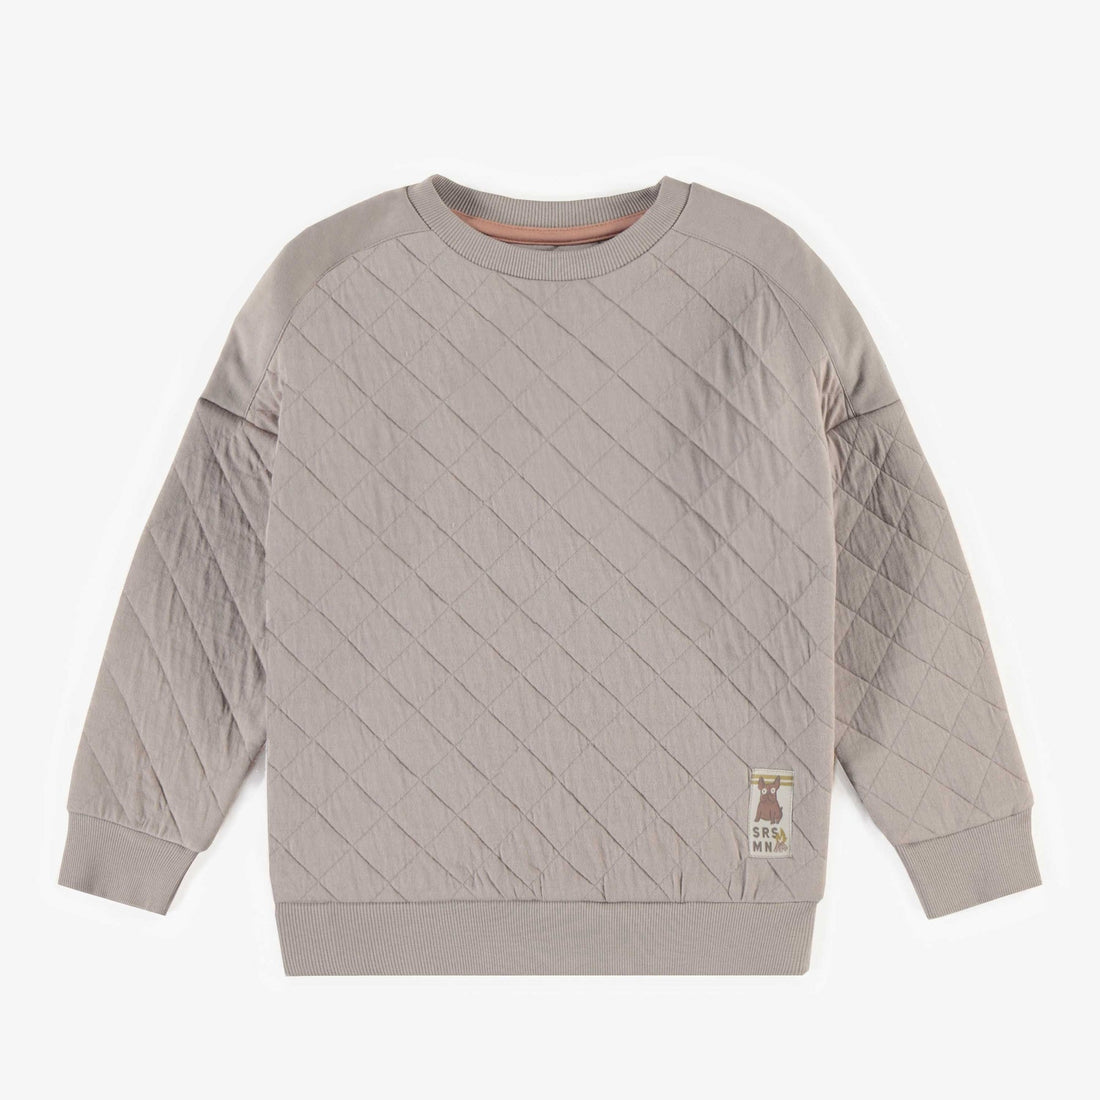 GREY SWEATER IN QUILTED JERSEY, CHILD